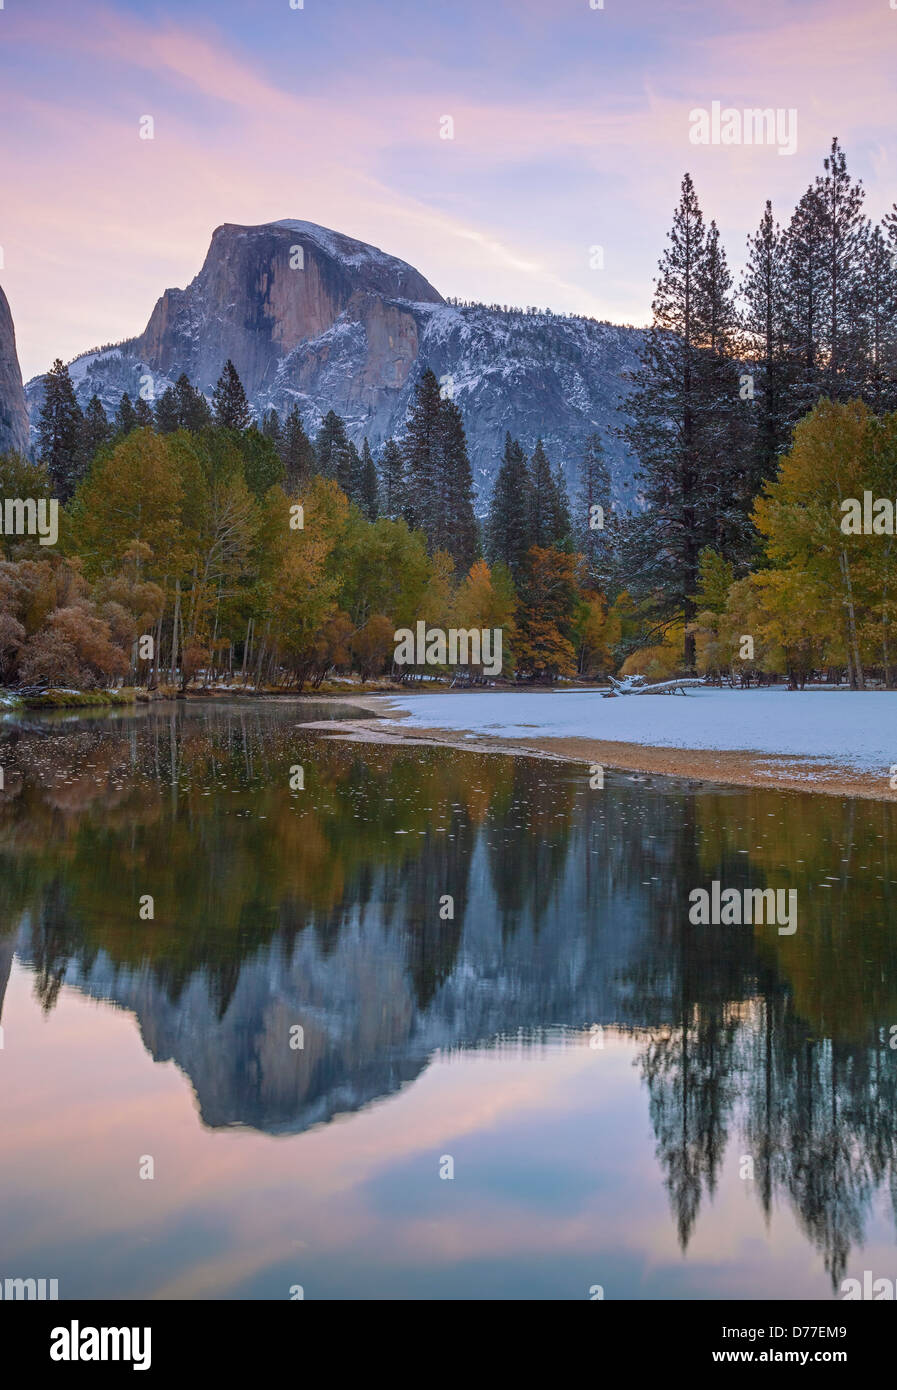 Yosemite National Park, CA Half Dome (8842 ft) reflected in the Merced River at dawn after a snowfall Stock Photo